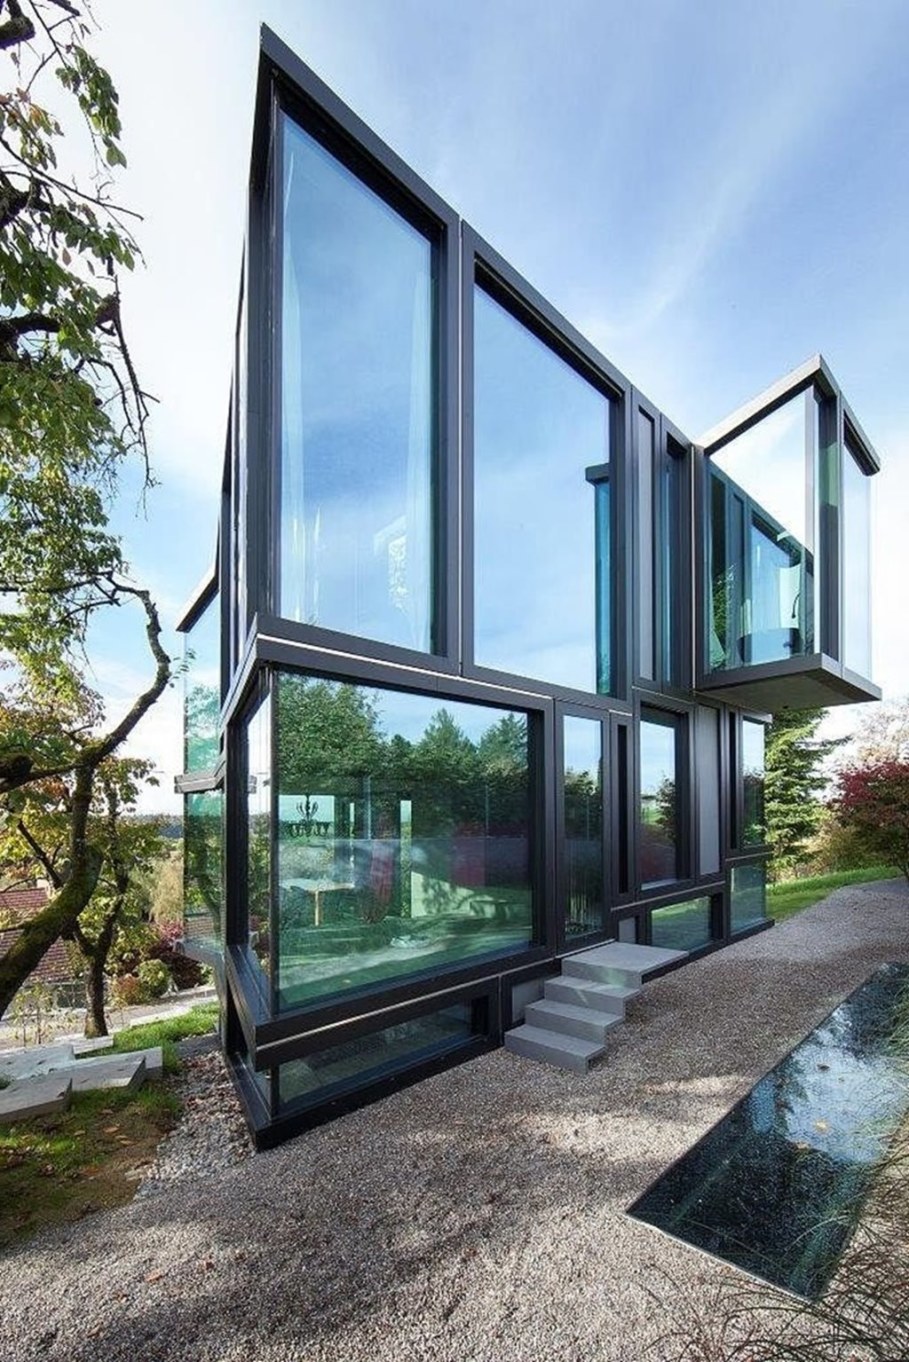 Design country house of glass and concrete 1